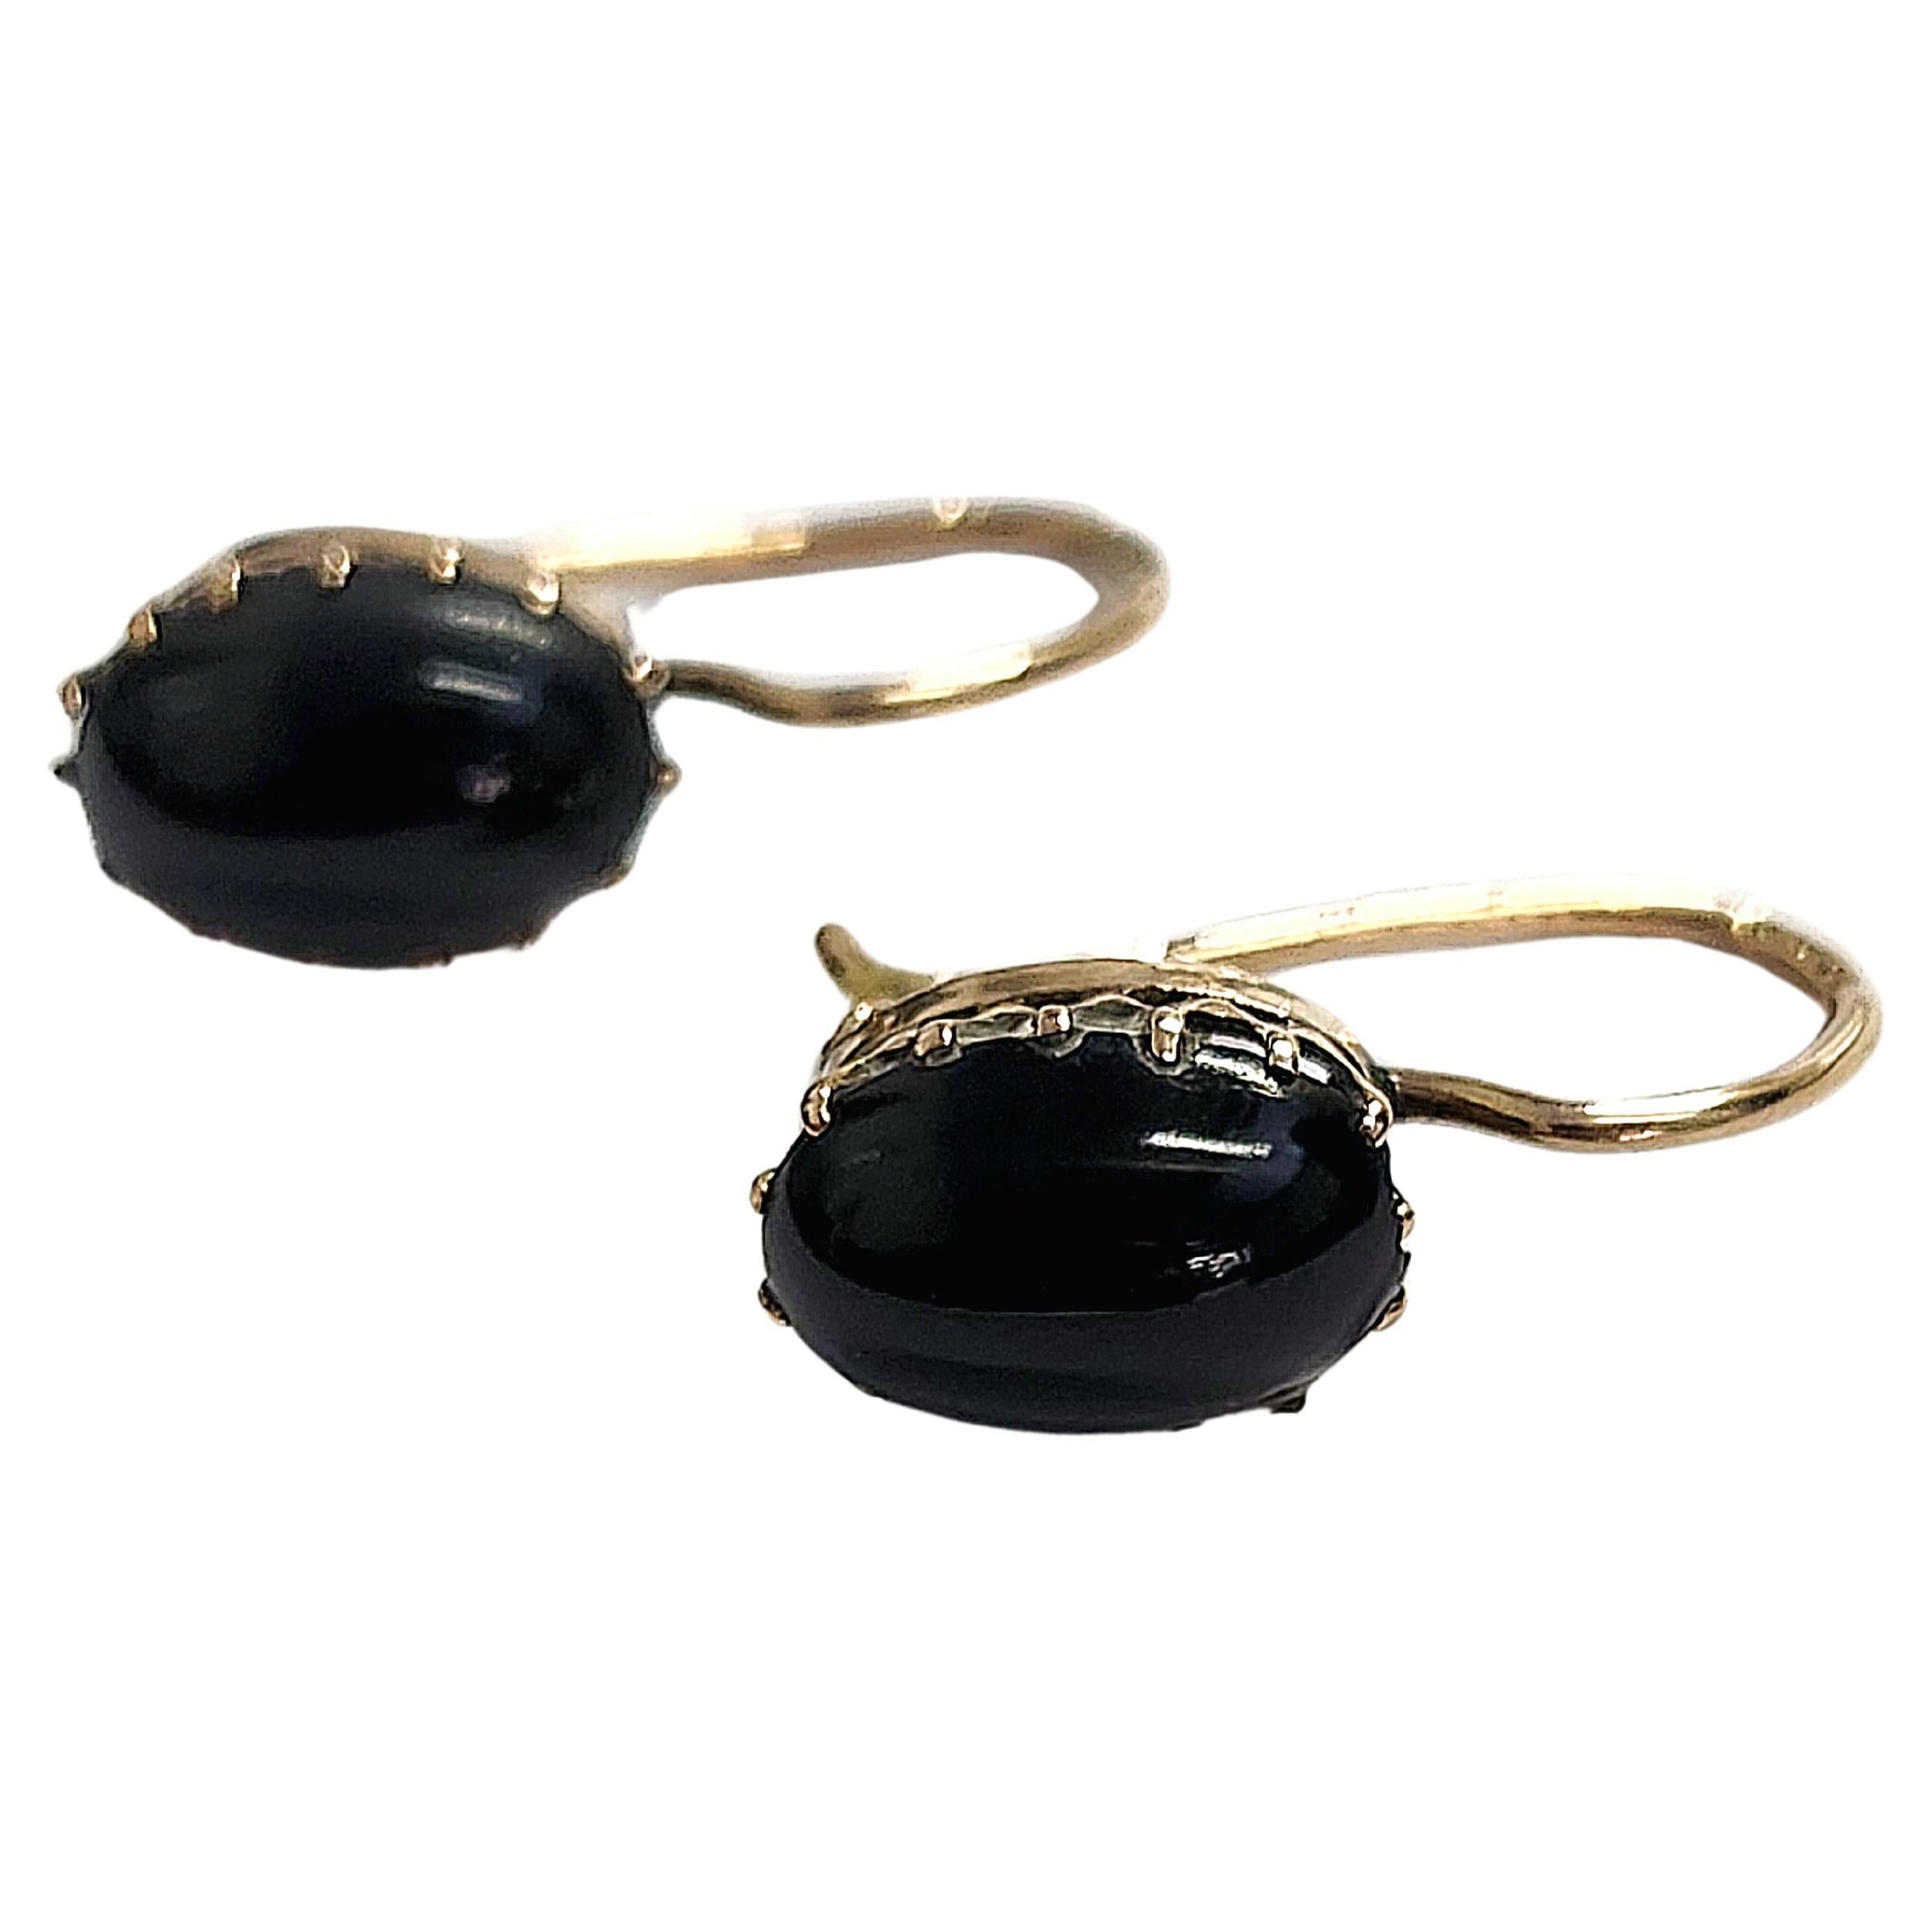 Antique imperial russian era 1910s 14k gold earrings centered with natural black agate stones hall marked 56 imperial russian gold standard and assay mark